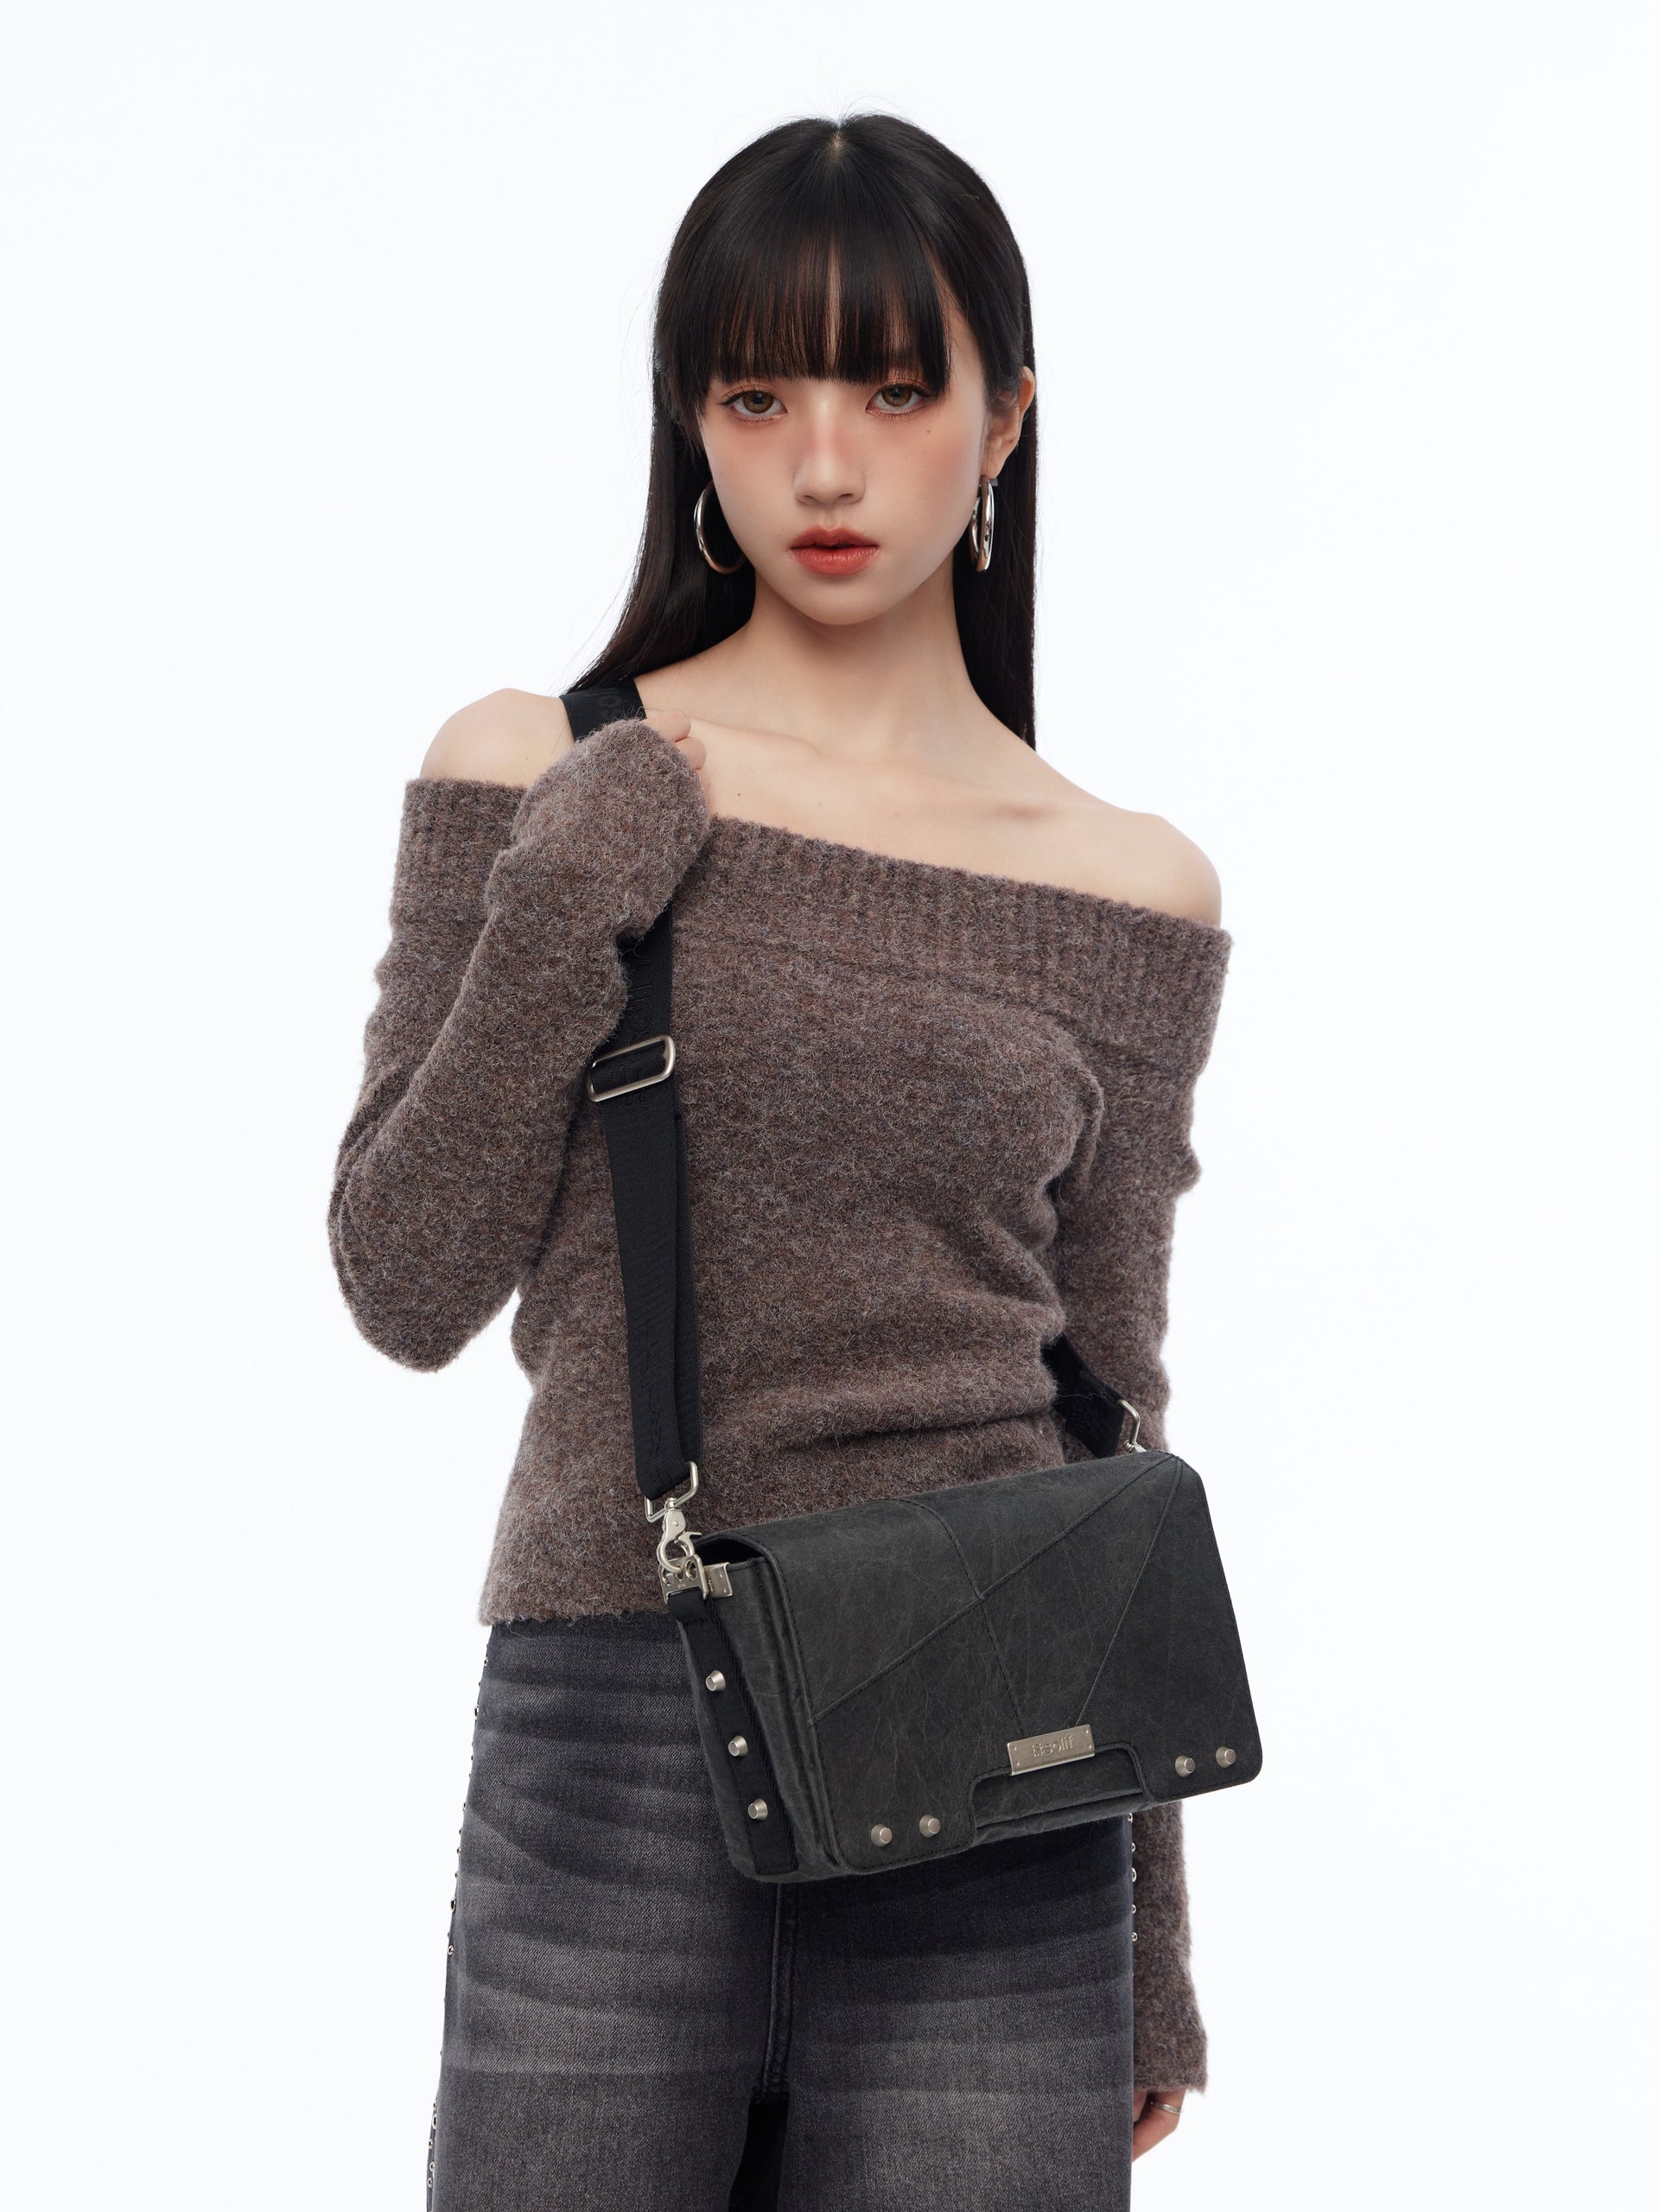  Solif-cross body structured box bag